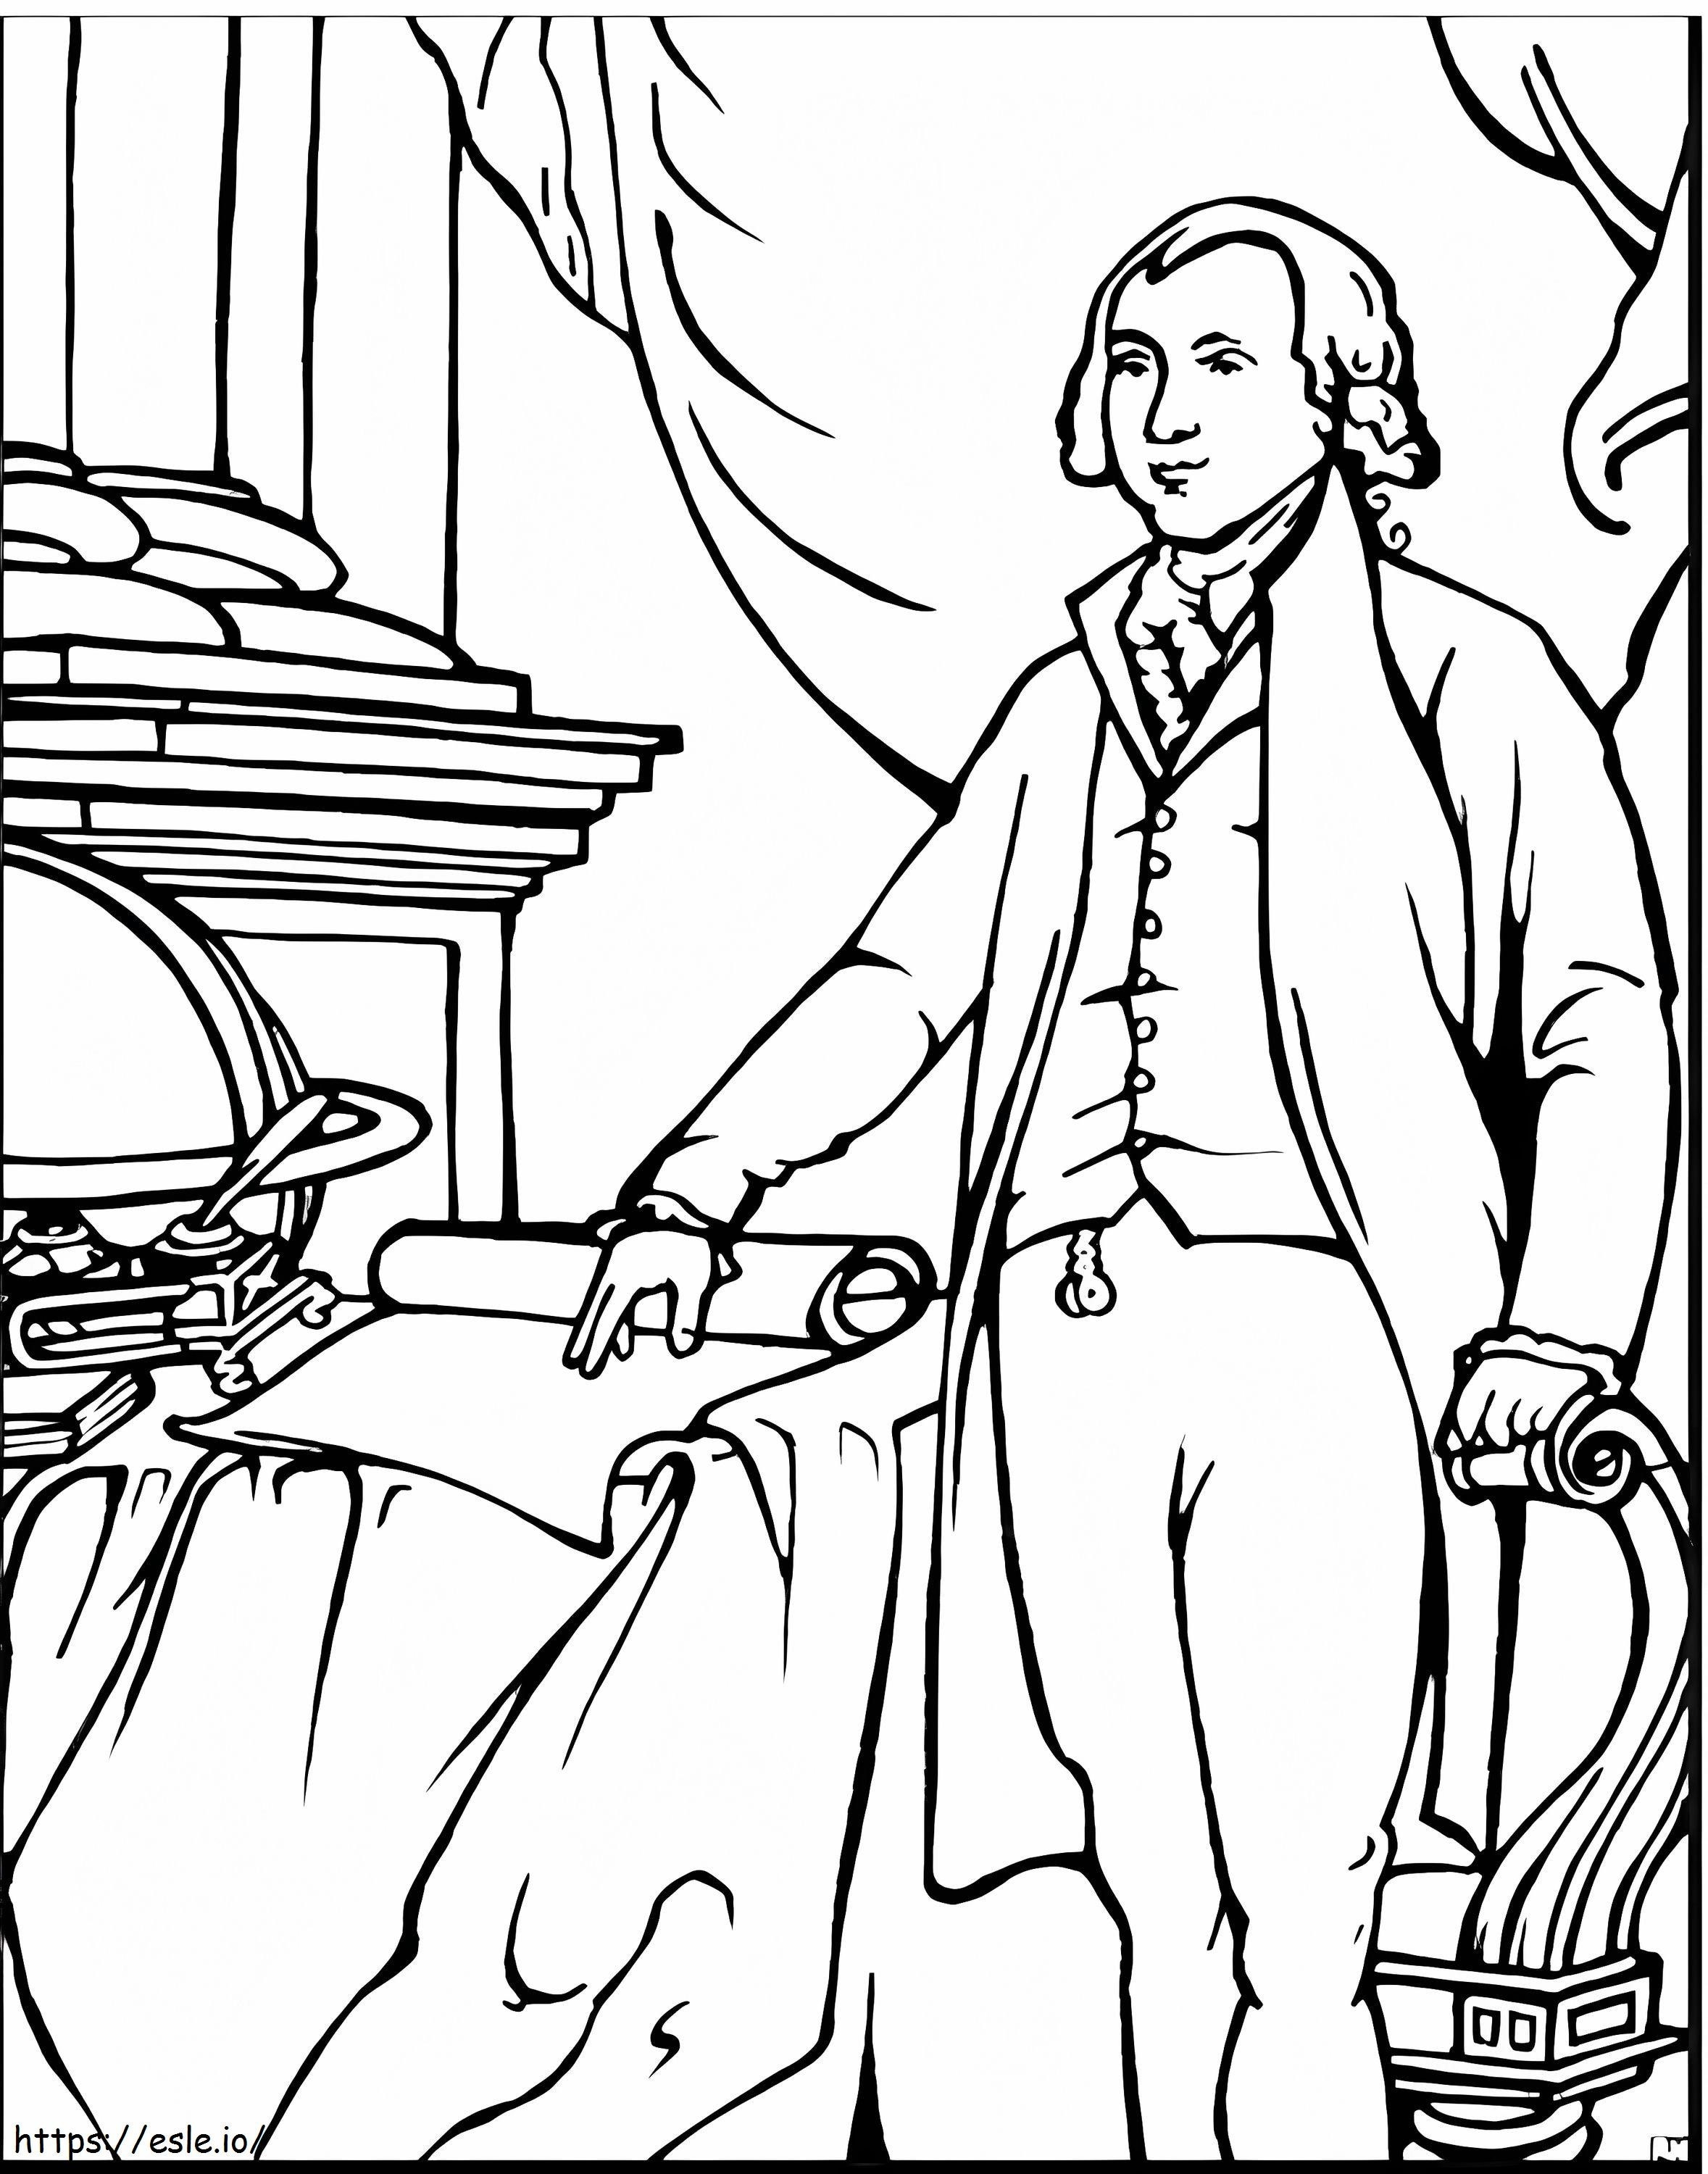 James Madison coloring page